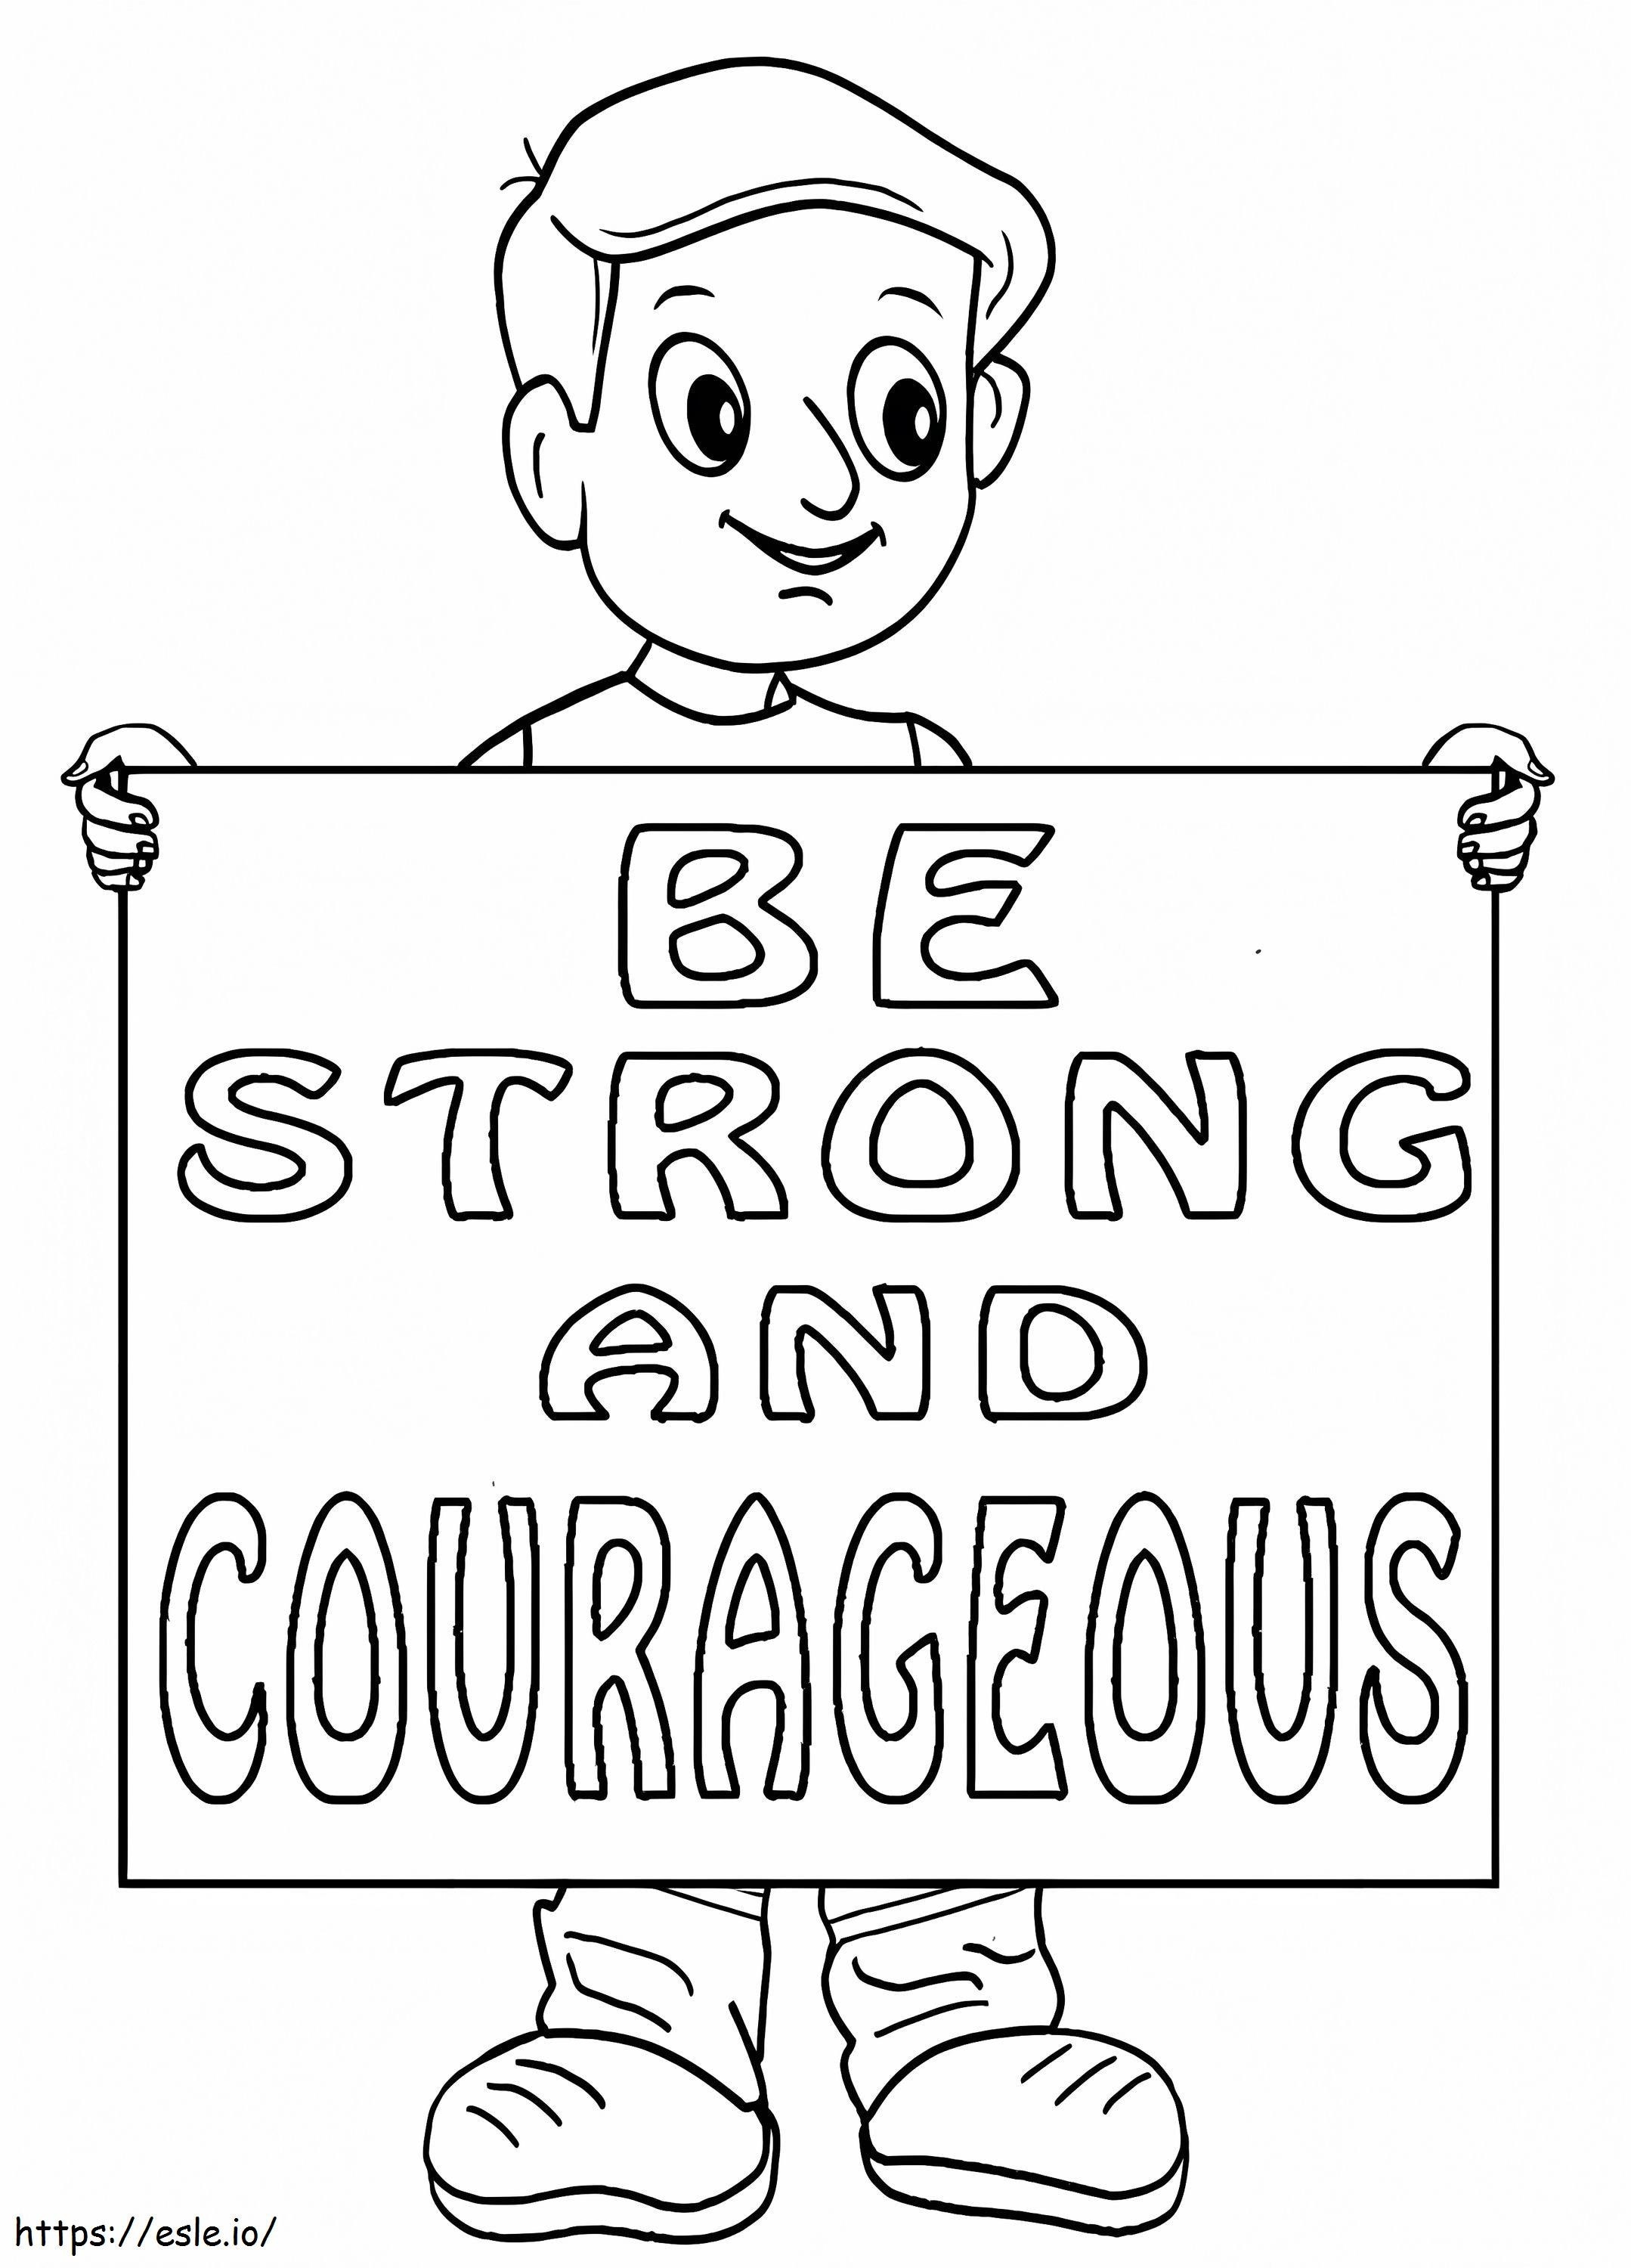 Courageous coloring page